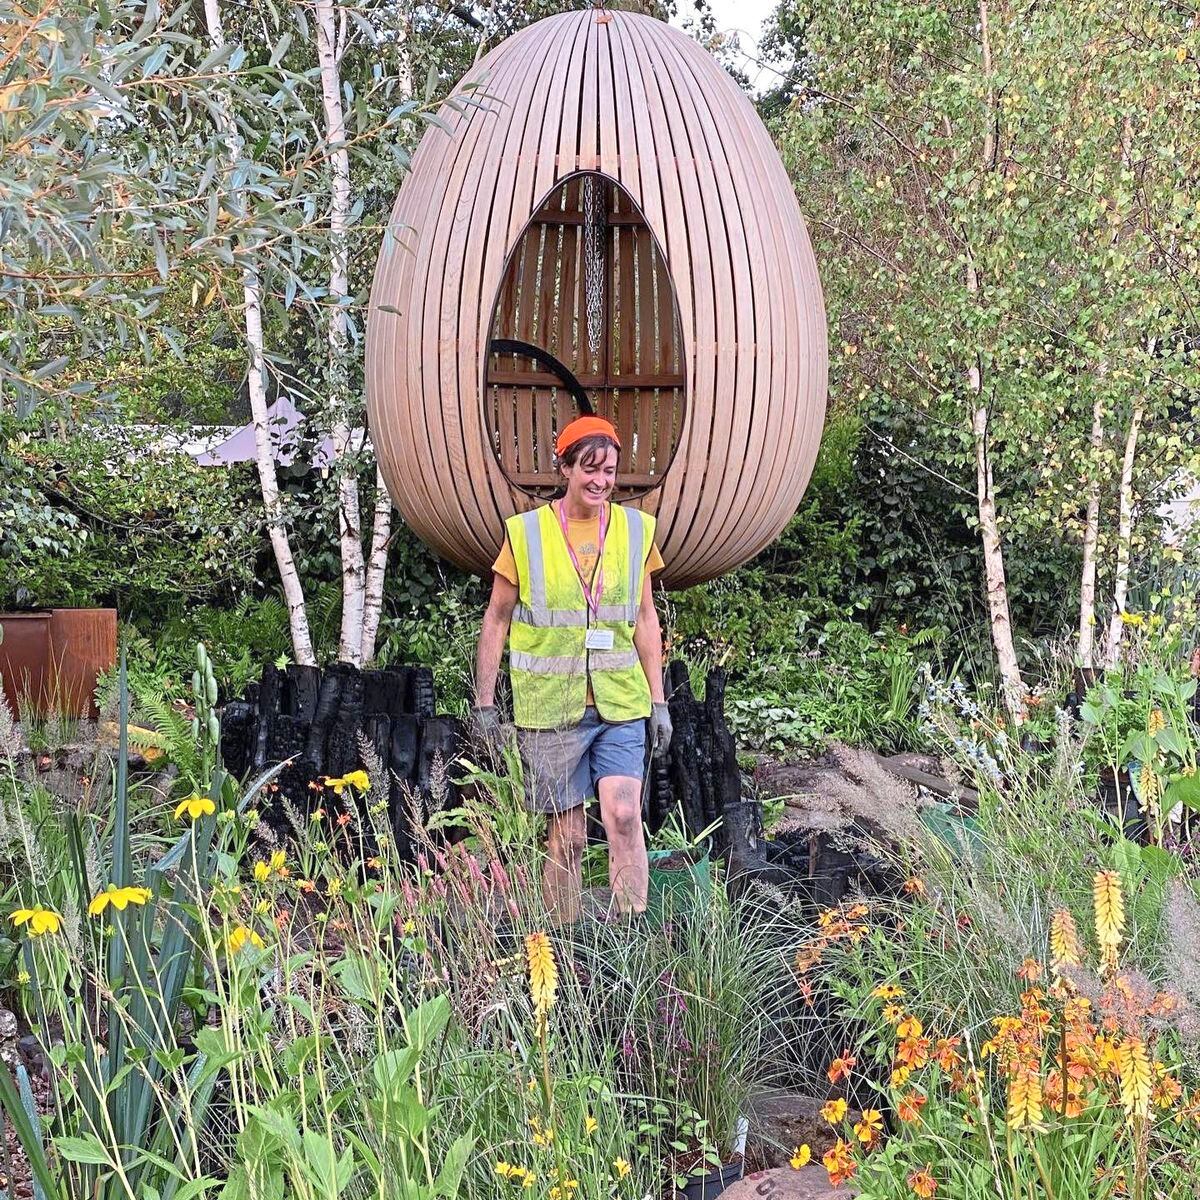 Jane Porter working at Chelsea 2021 on the Yeo Valley Garden designed by Tom Massey. (Picture by Petra Sturgeon)